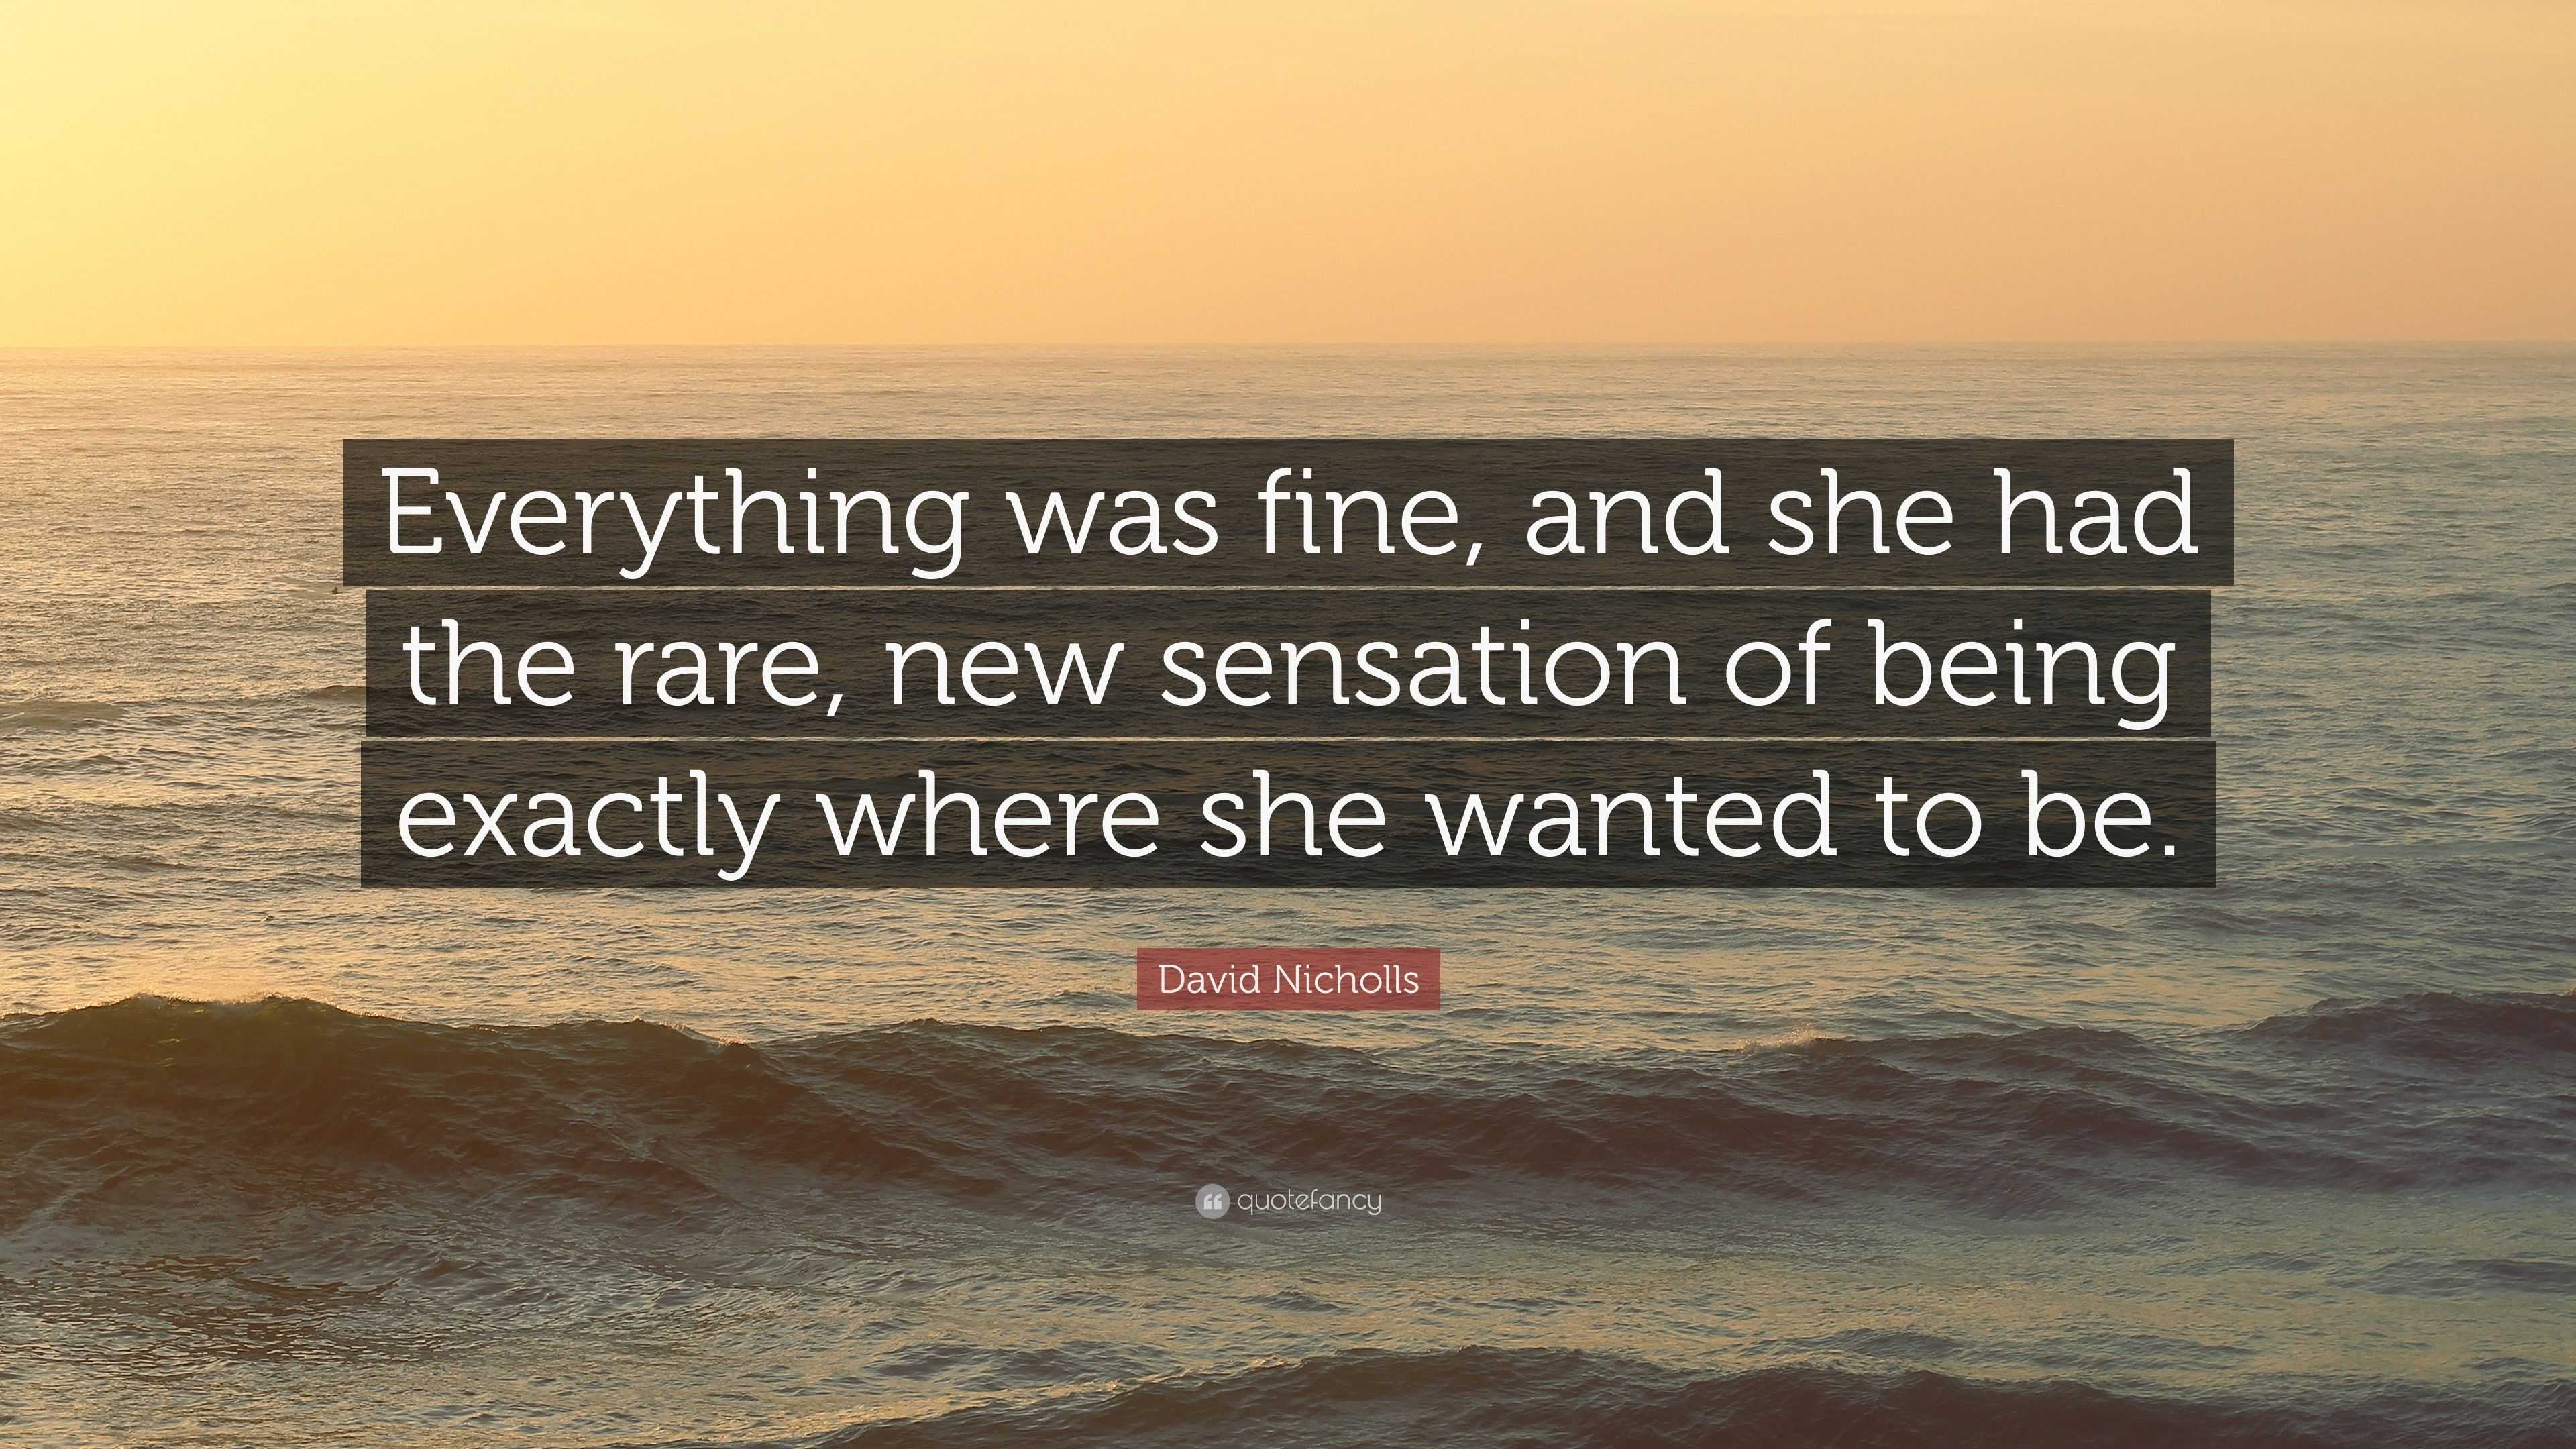 David Nicholls Quote: “Everything was fine, and she had the rare, new ...